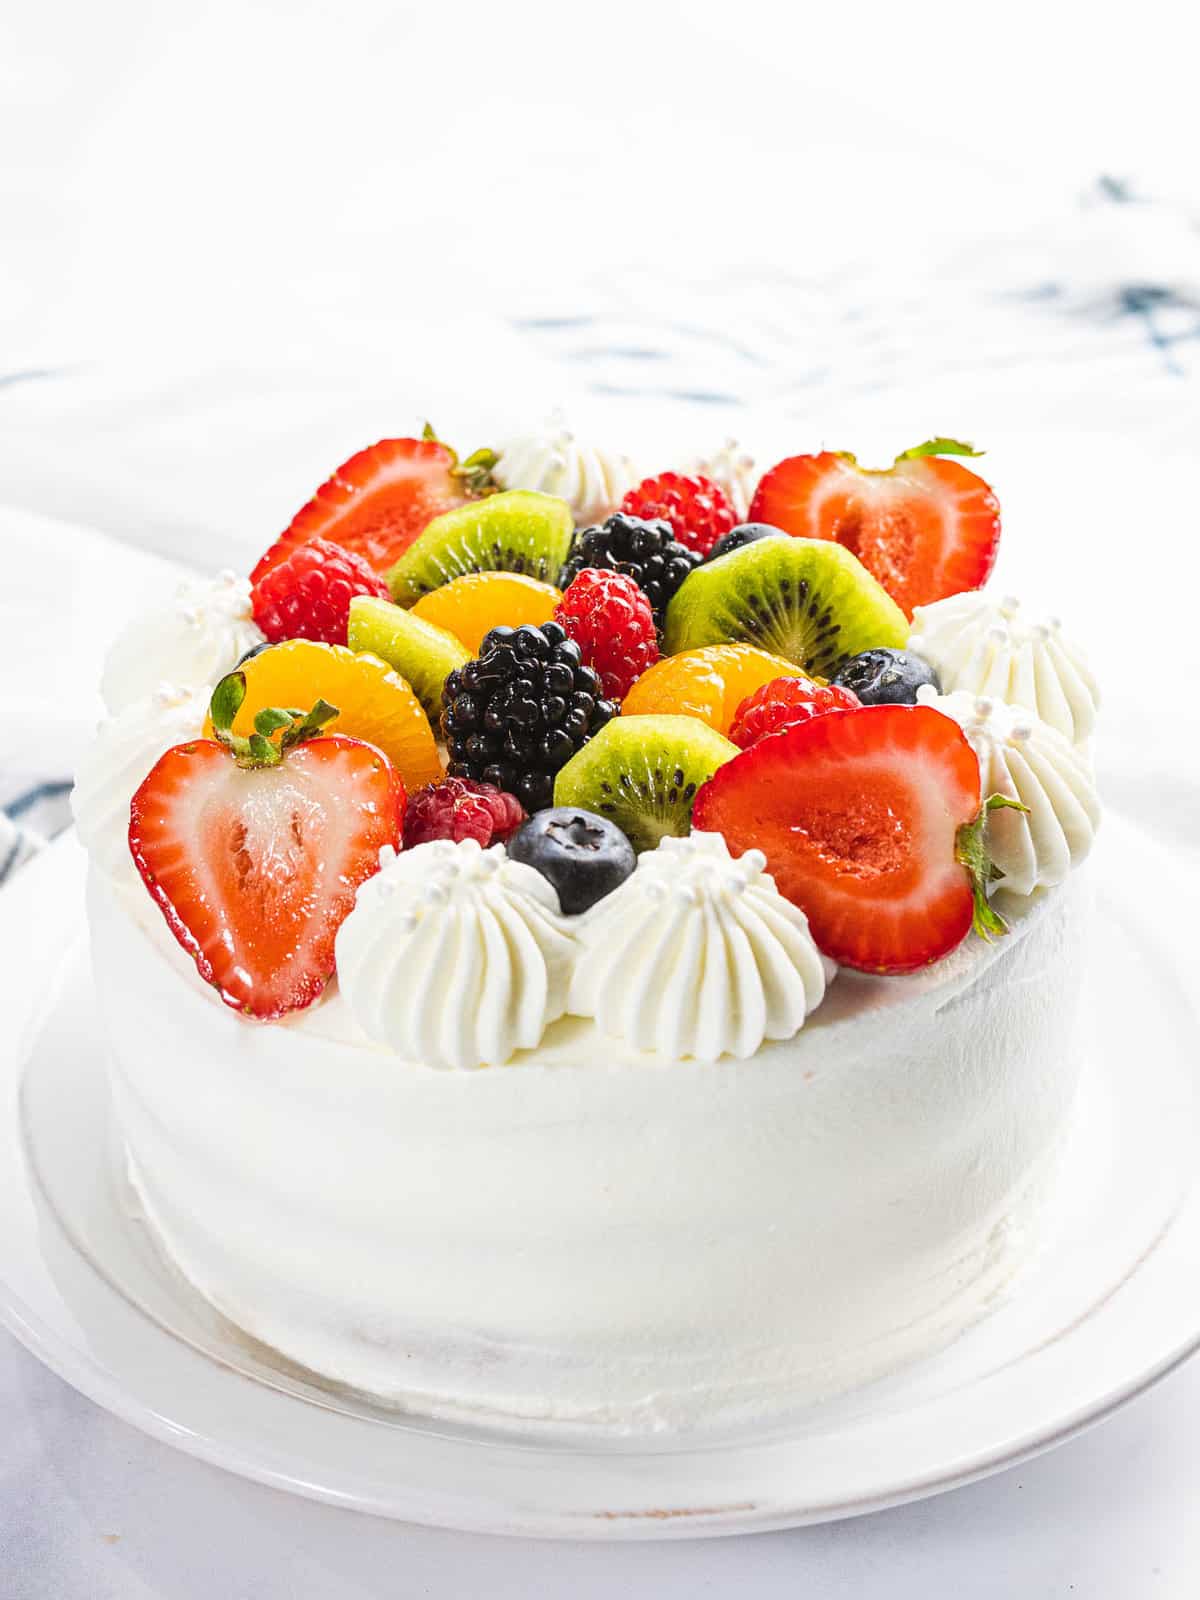 Fresh fruit cake topped with strawberries, kiwi, berries, and whipped cream.